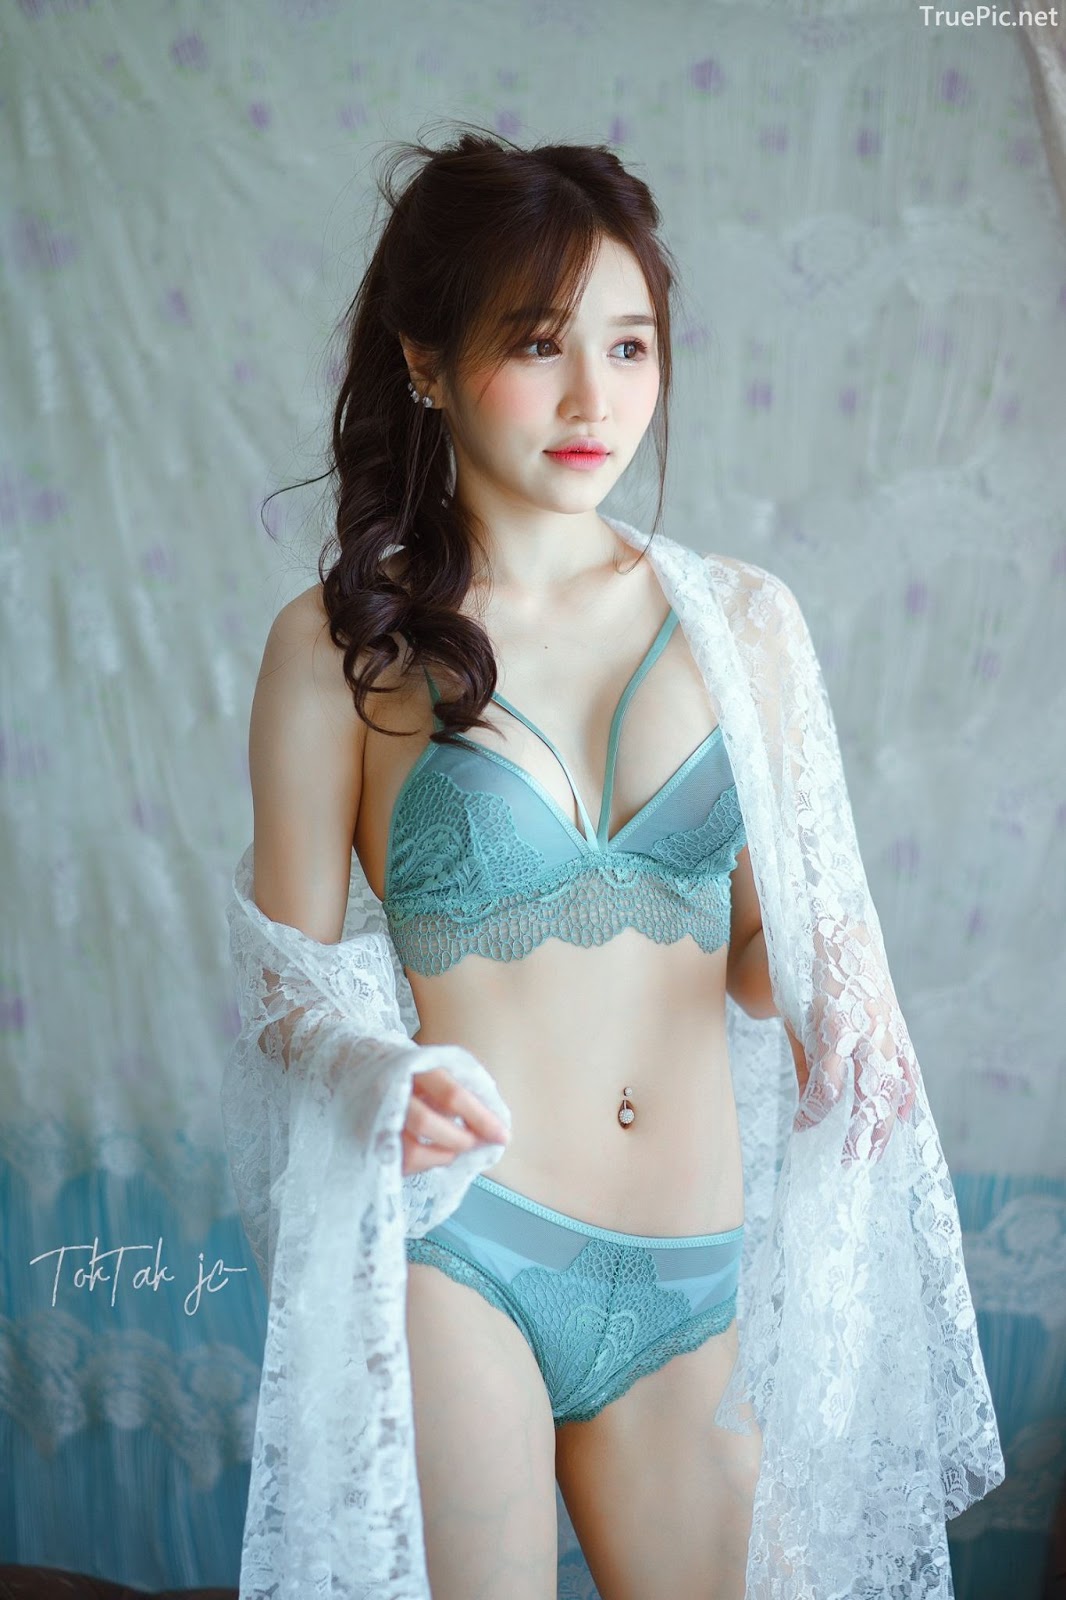 Thailand sexy model - Patcharaporn Chaopitakwong - The Blue Lingerie - TruePic.net - Picture 13